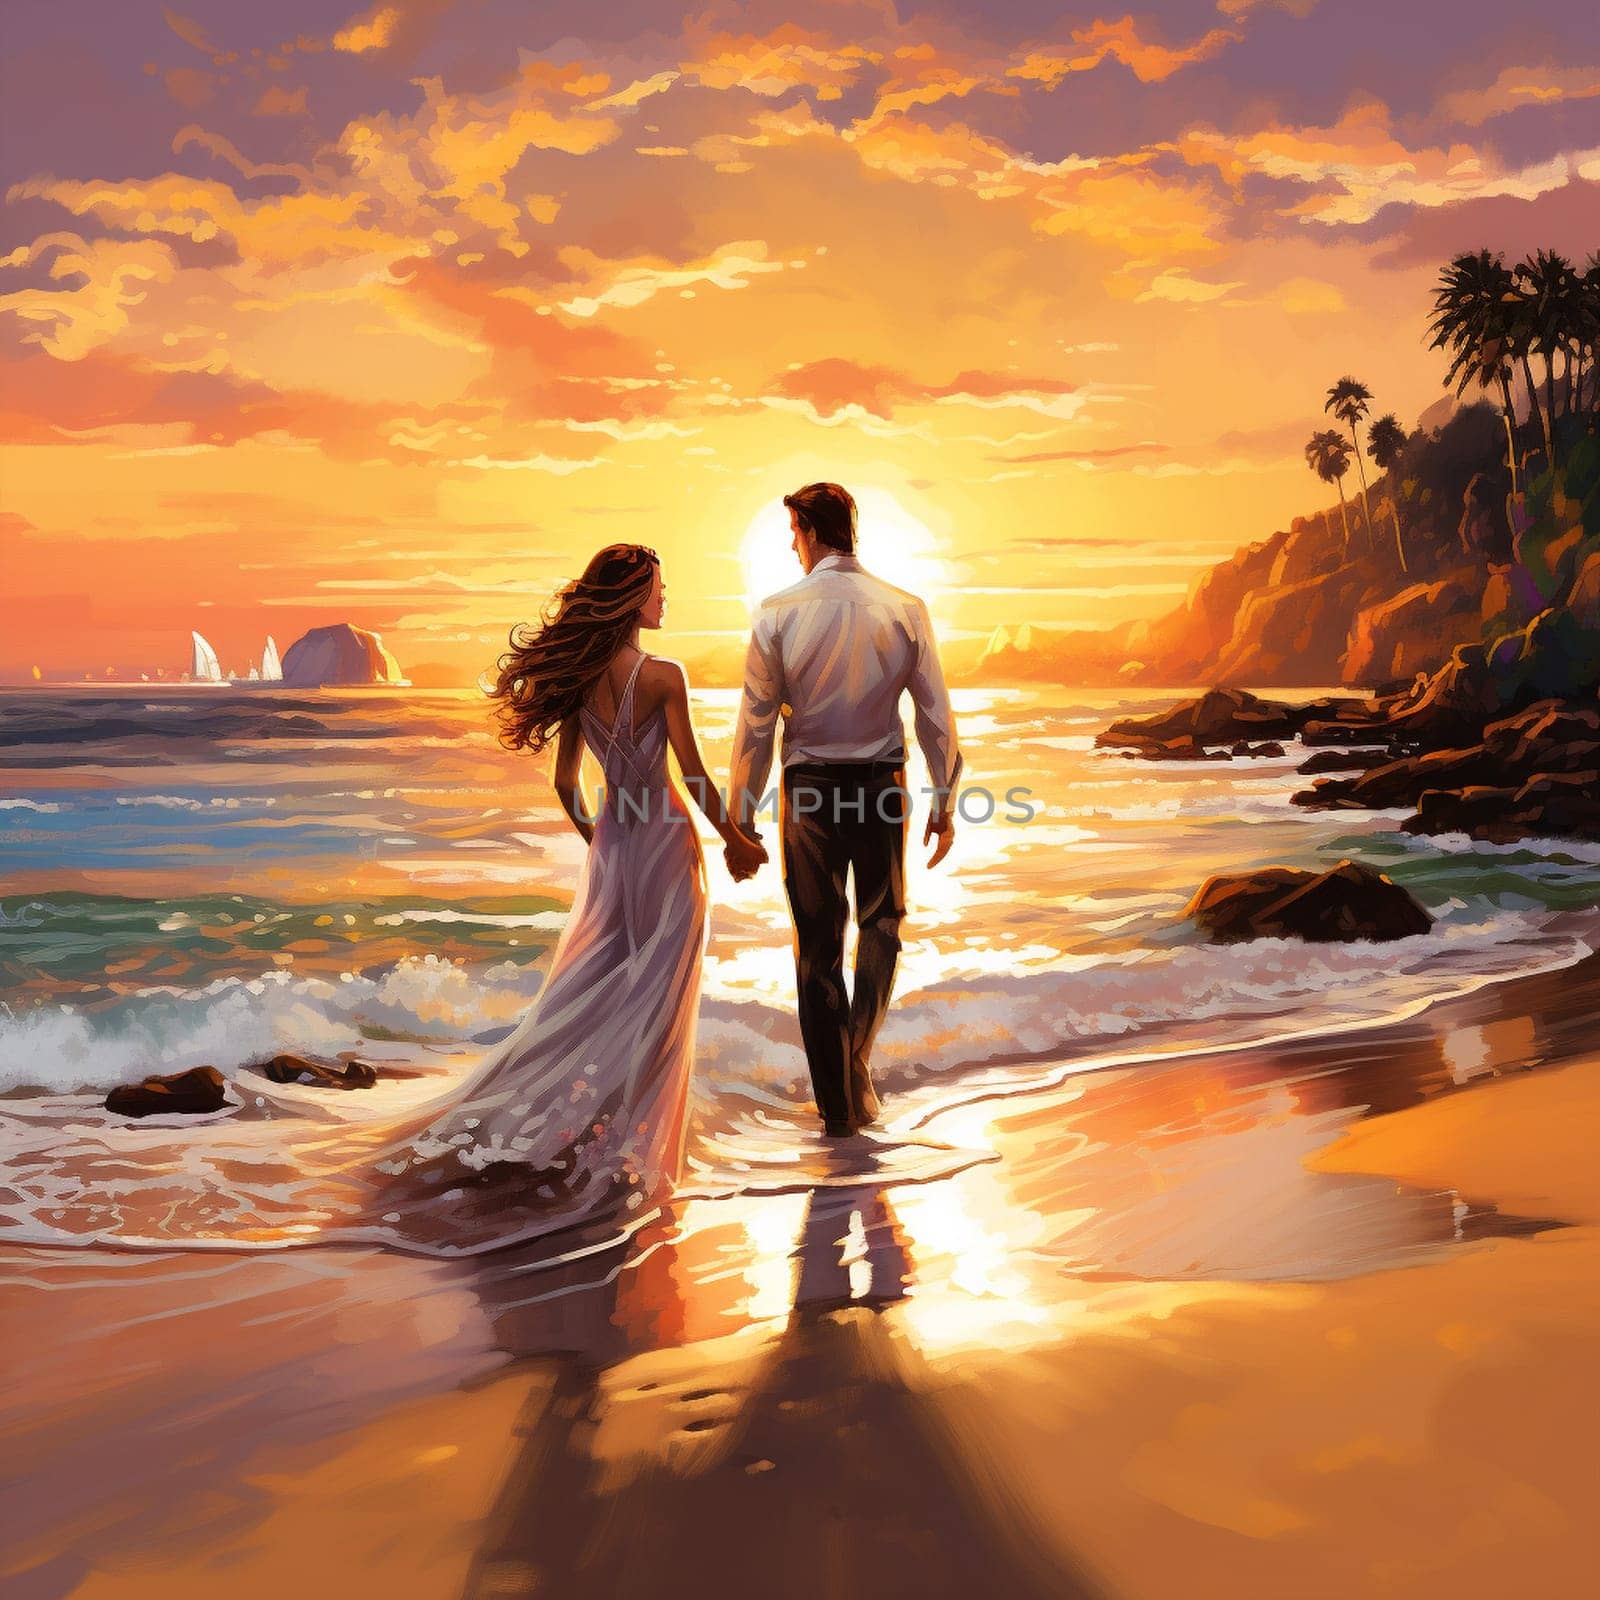 Immerse yourself in the captivating world of love, commitment, and adventure with this vibrant illustration titled 'Ocean of Promises: An Everlasting Vow Exchange'. This eye-catching artwork depicts a unique vow exchange set against the backdrop of a magnificent ocean, creating a truly magical moment. Picture a couple standing on a secluded beach, surrounded by crashing waves, golden sands, and a breathtaking sunset painting the sky with vibrant hues. The couple, adorned in elegant attire, radiates both joy and serenity as they exchange heartfelt promises. You'll be enthralled by enchanting mermaids swimming nearby and beautiful seashells scattered around, further enhancing the enchanting atmosphere of this scene. This artwork is designed to evoke feelings of romance, destiny, and eternal love, making it perfect for a diverse audience seeking captivating visuals for wedding invitations, marriage blogs, or even anniversary festivities.